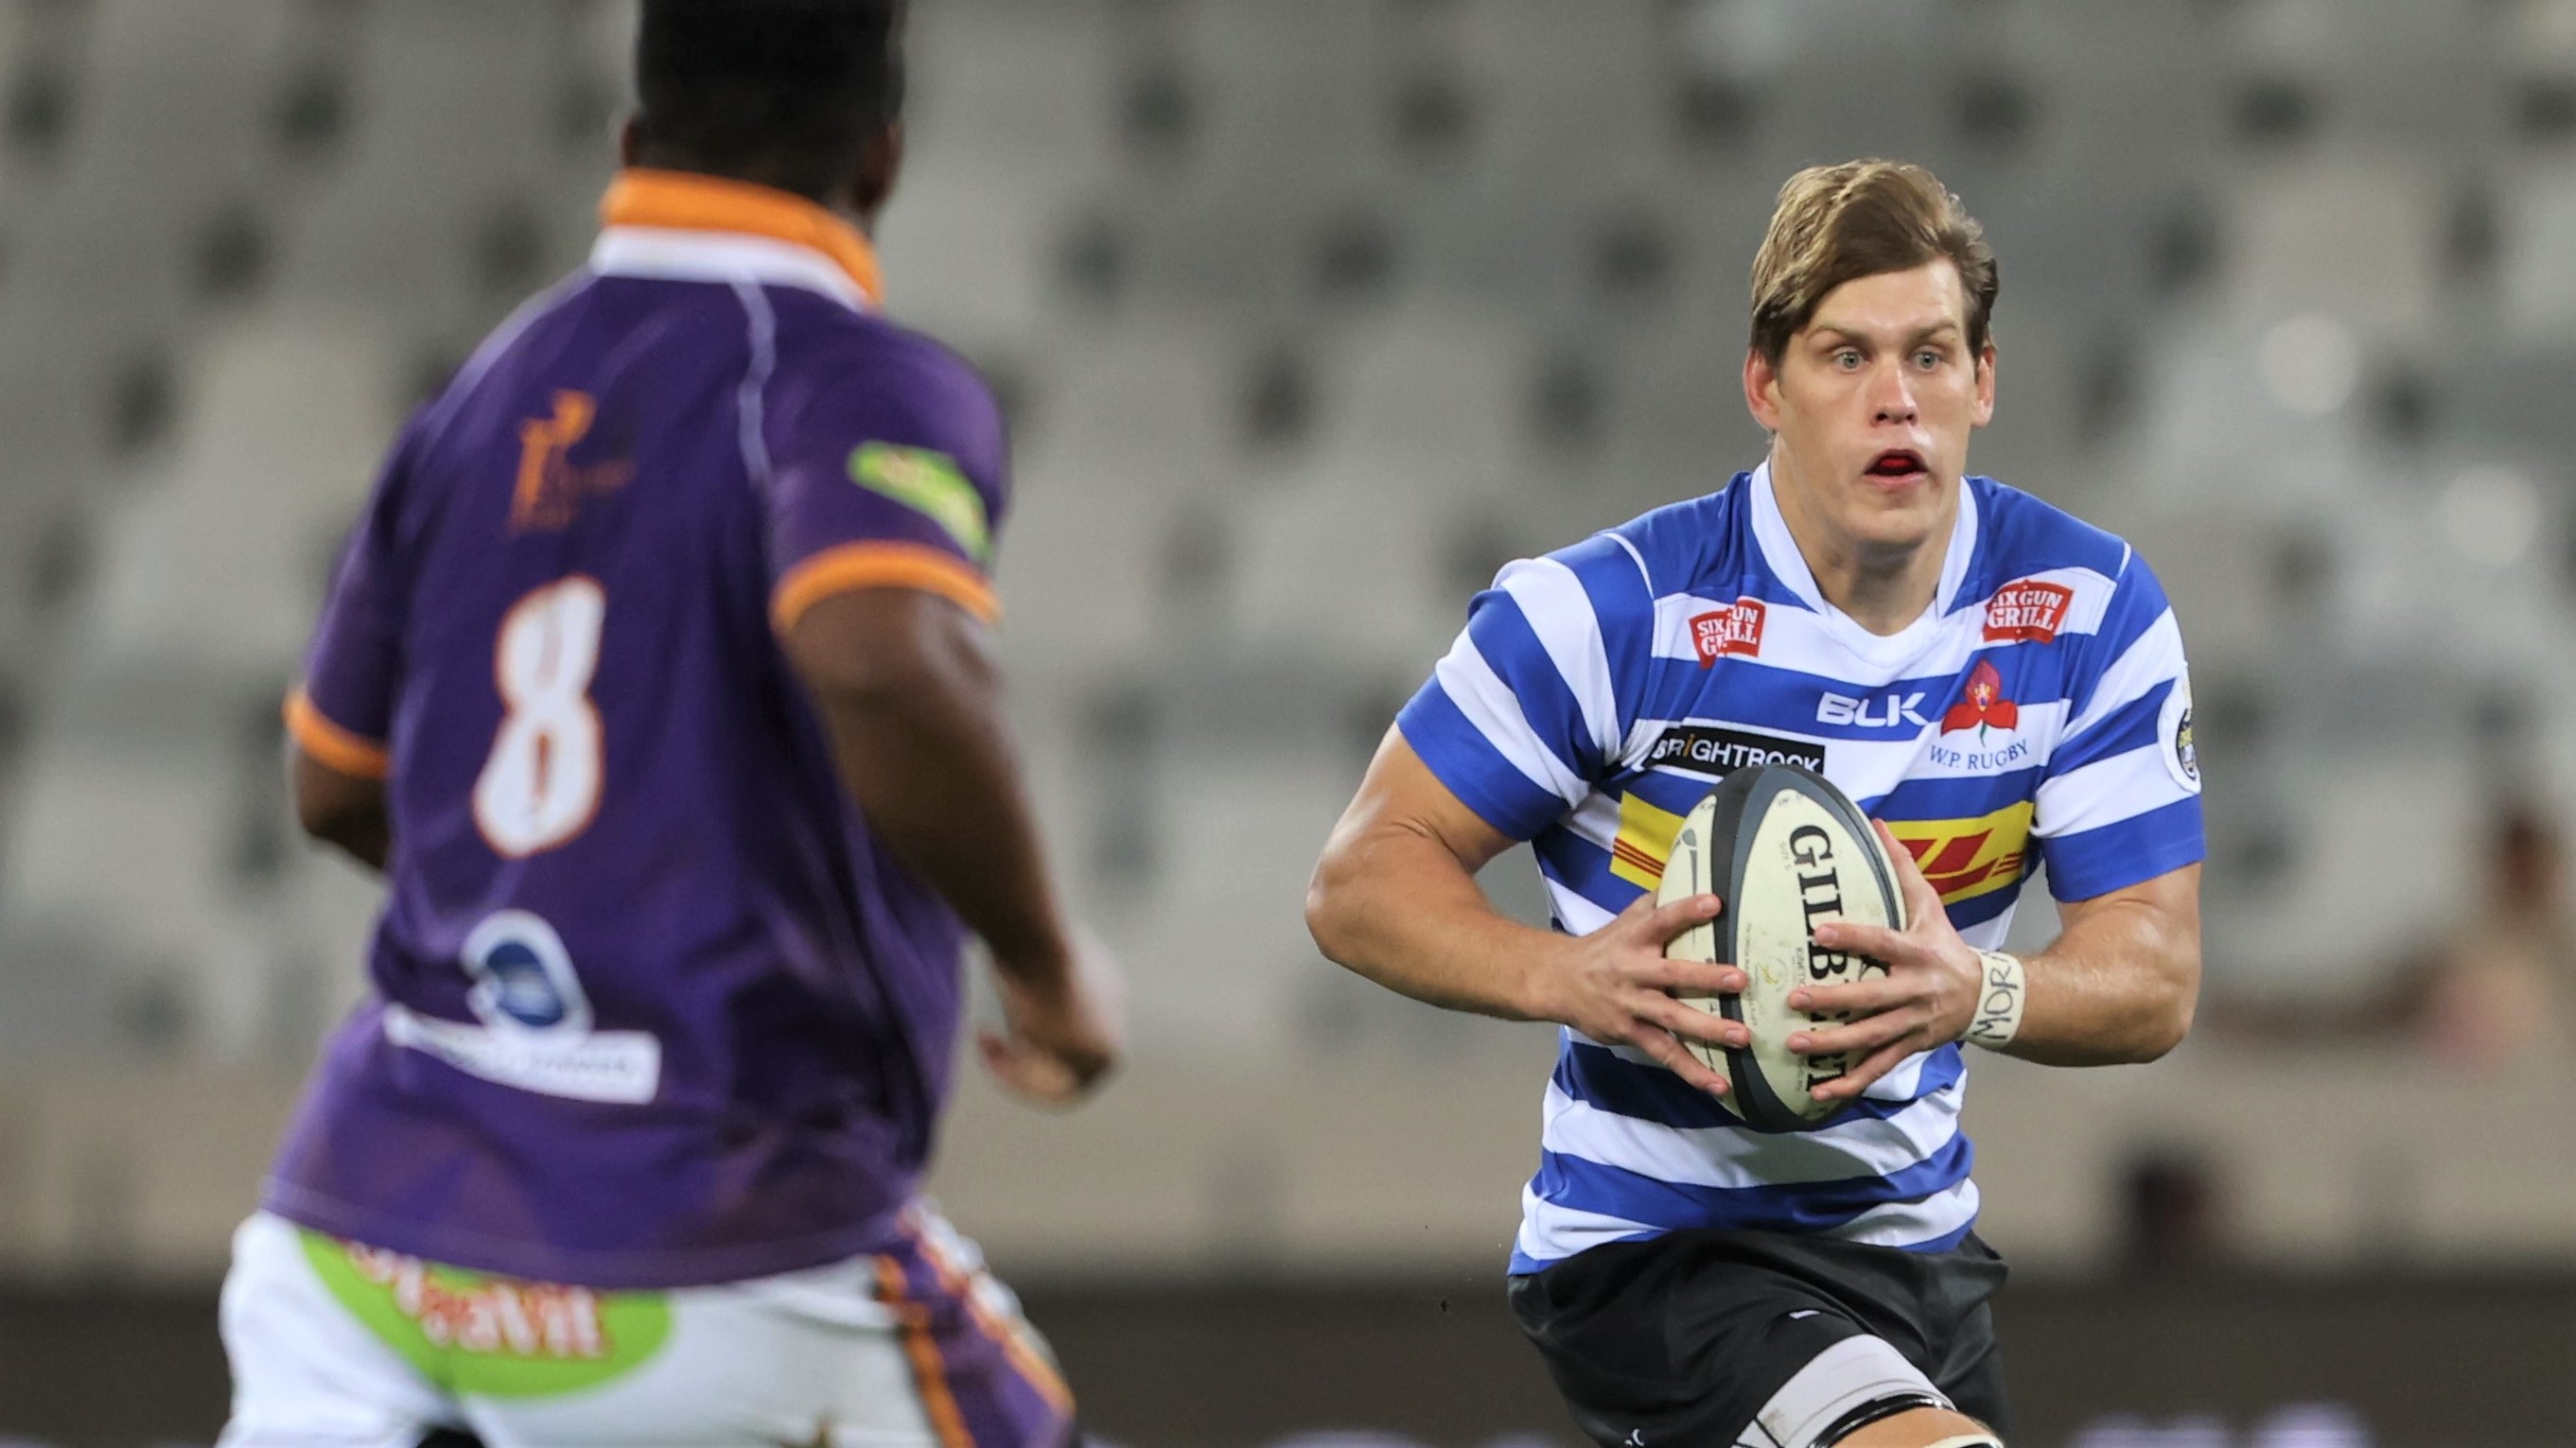 CAPE TOWN, SOUTH AFRICA - APRIL 08: Jarrod Taylor of Western Province during the Currie Cup, Premier Division match between DHL Western Province and NovaVit Griffons at DHL Stadium on April 08, 2023 in Cape Town, South Africa. (Photo by Carl Fourie/Gallo Images)